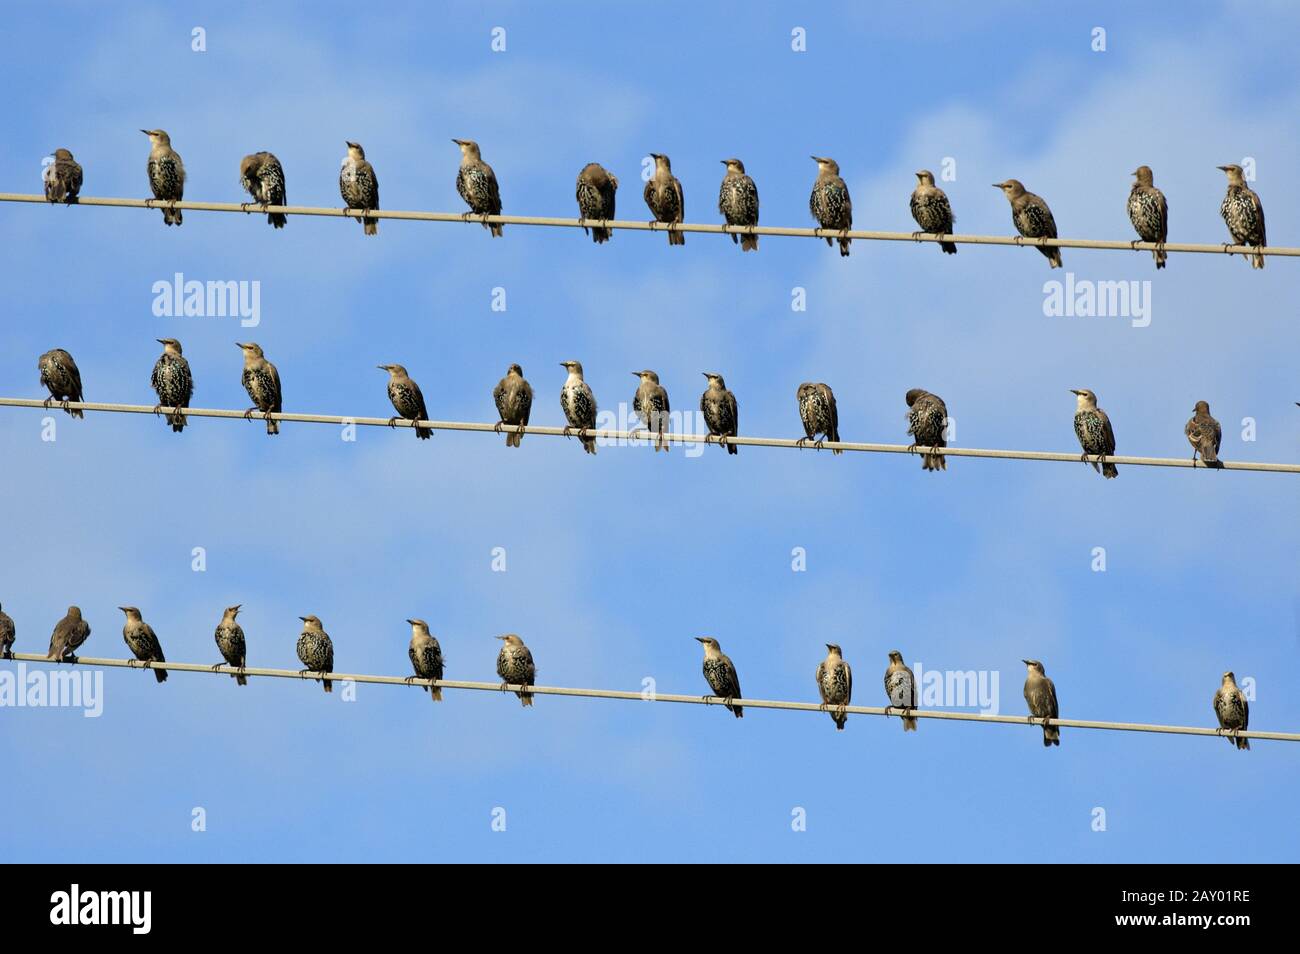 Starling, Sturnus vulgaris, Common Starling, starlings gather for bird migration on wire Stock Photo